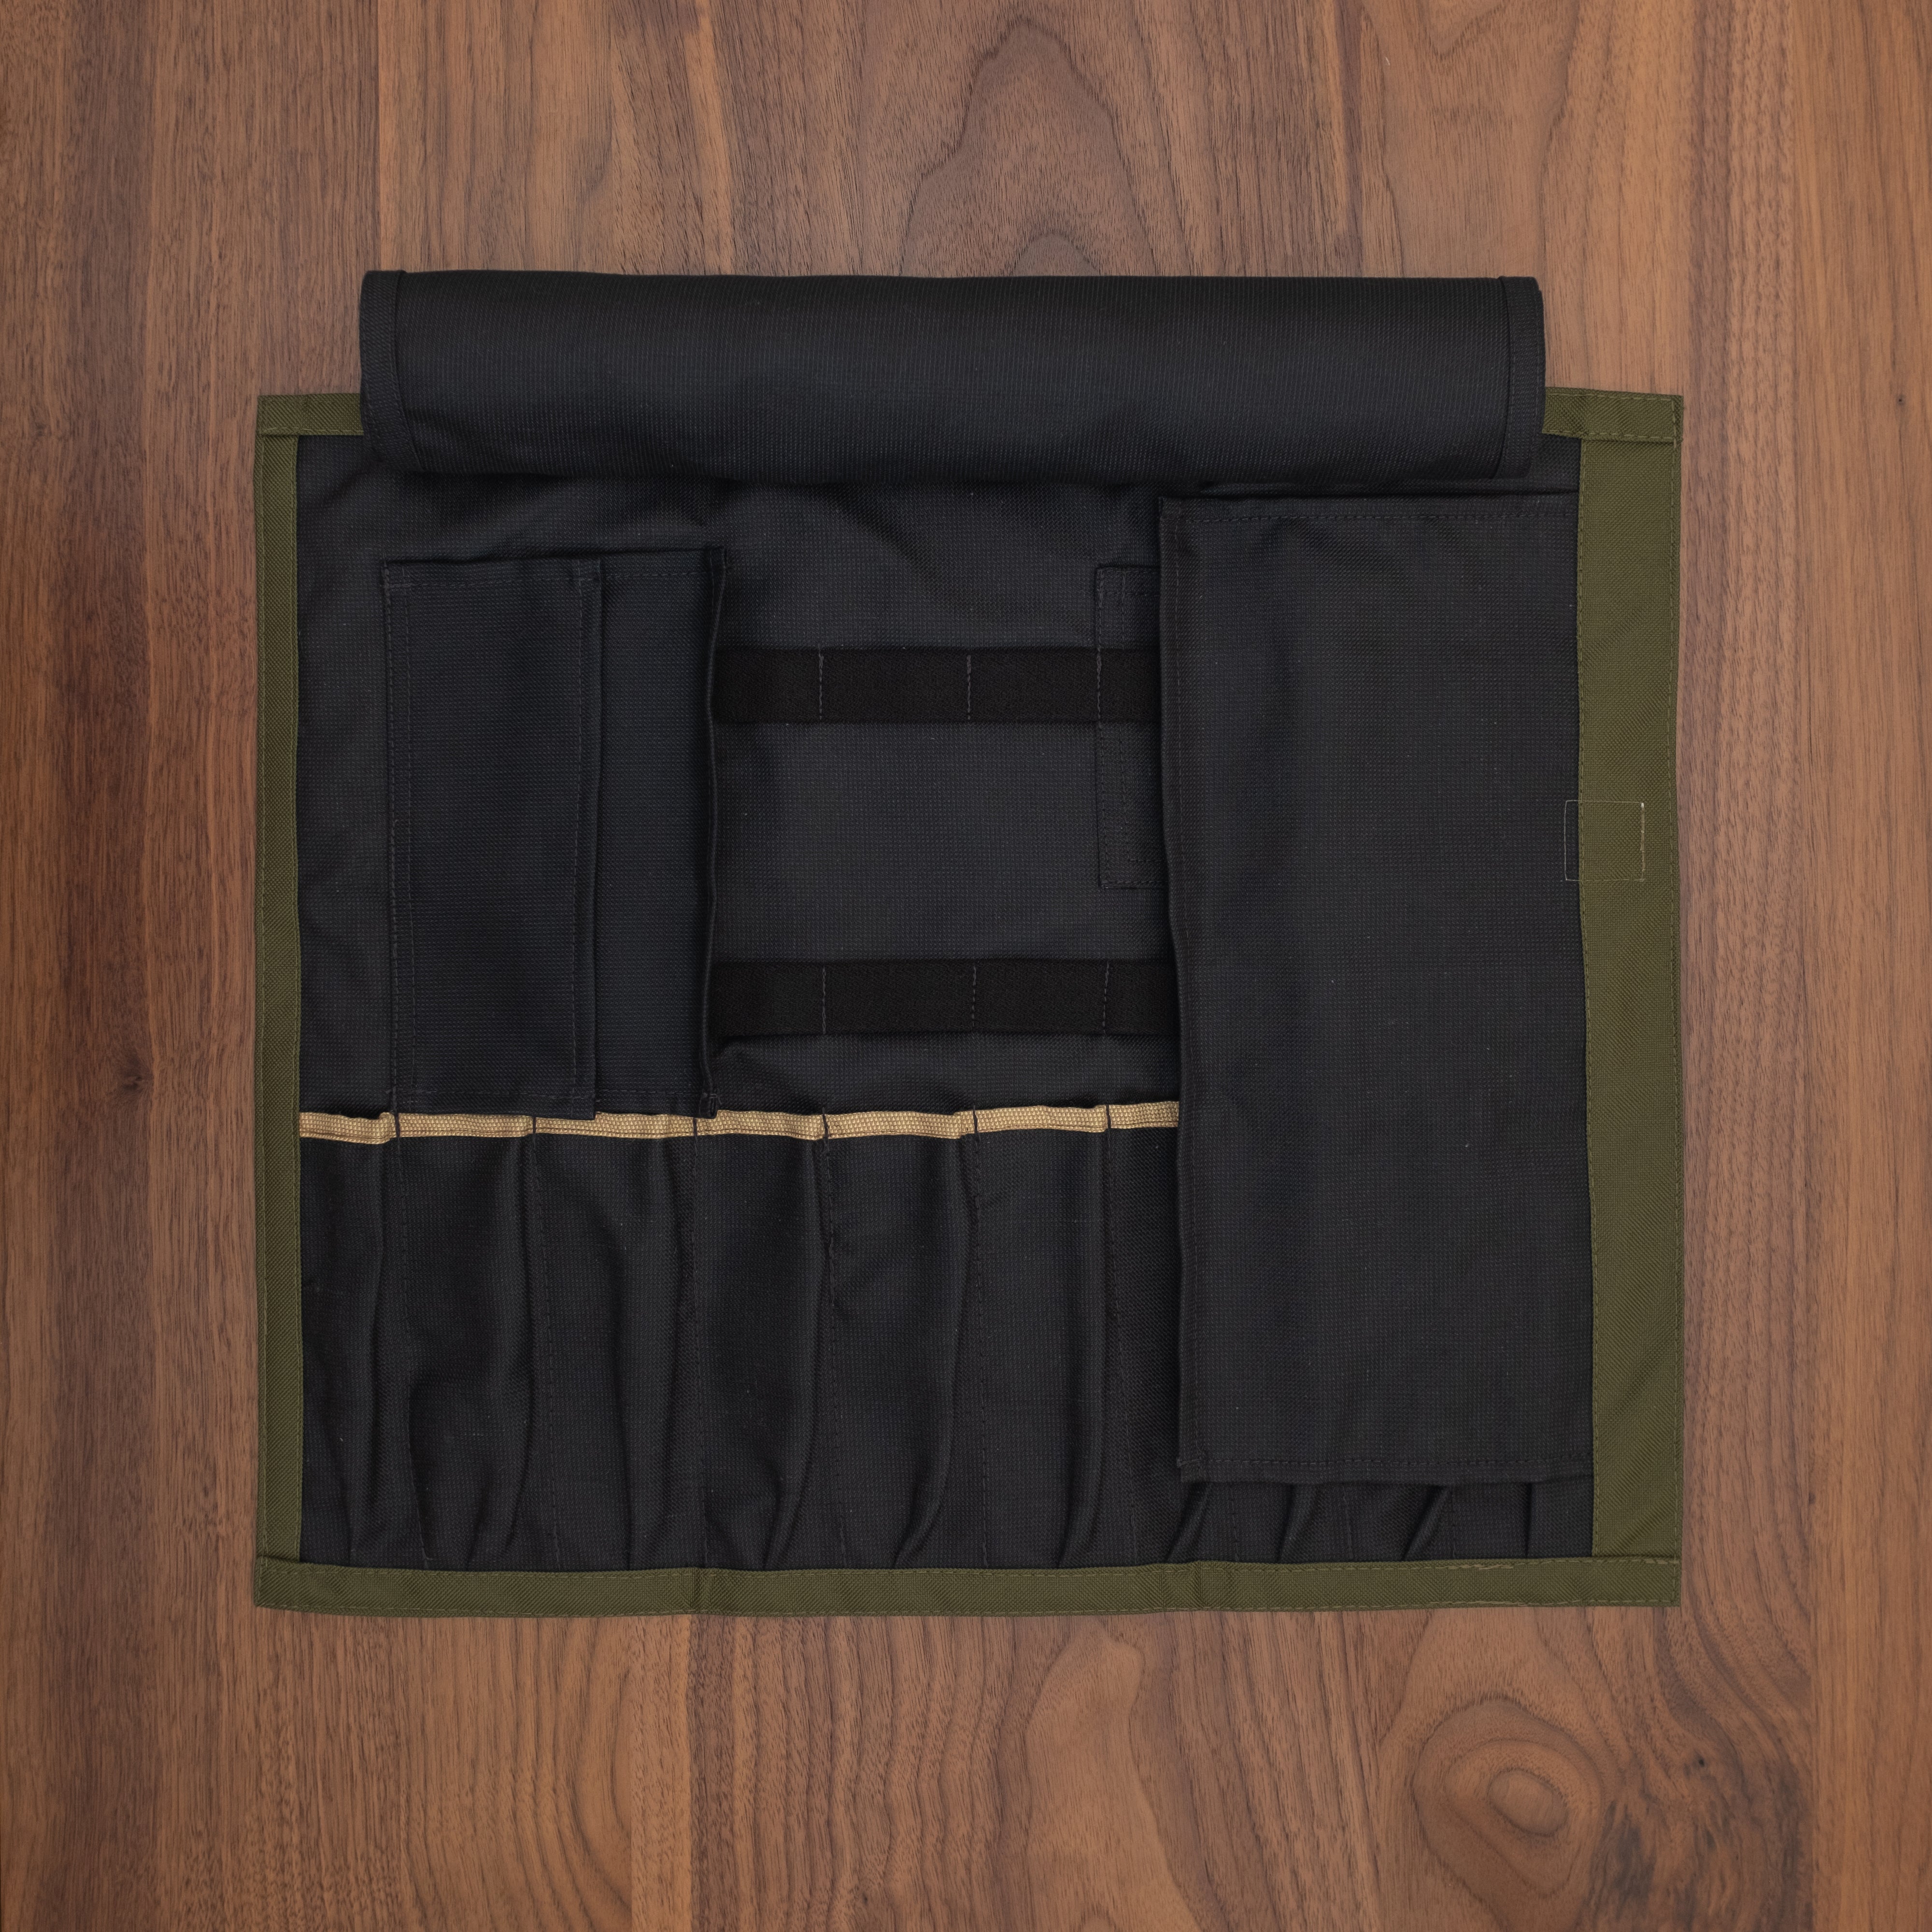 Black interior of the Ottertex Edition Olive/Orange Side Hustle knife roll laid out flat on a wooden surface. The interior is made of a 50-50 Kevlar/Nomex blend for long lasting protection. Design by Craftmade Aprons in Minnesota.